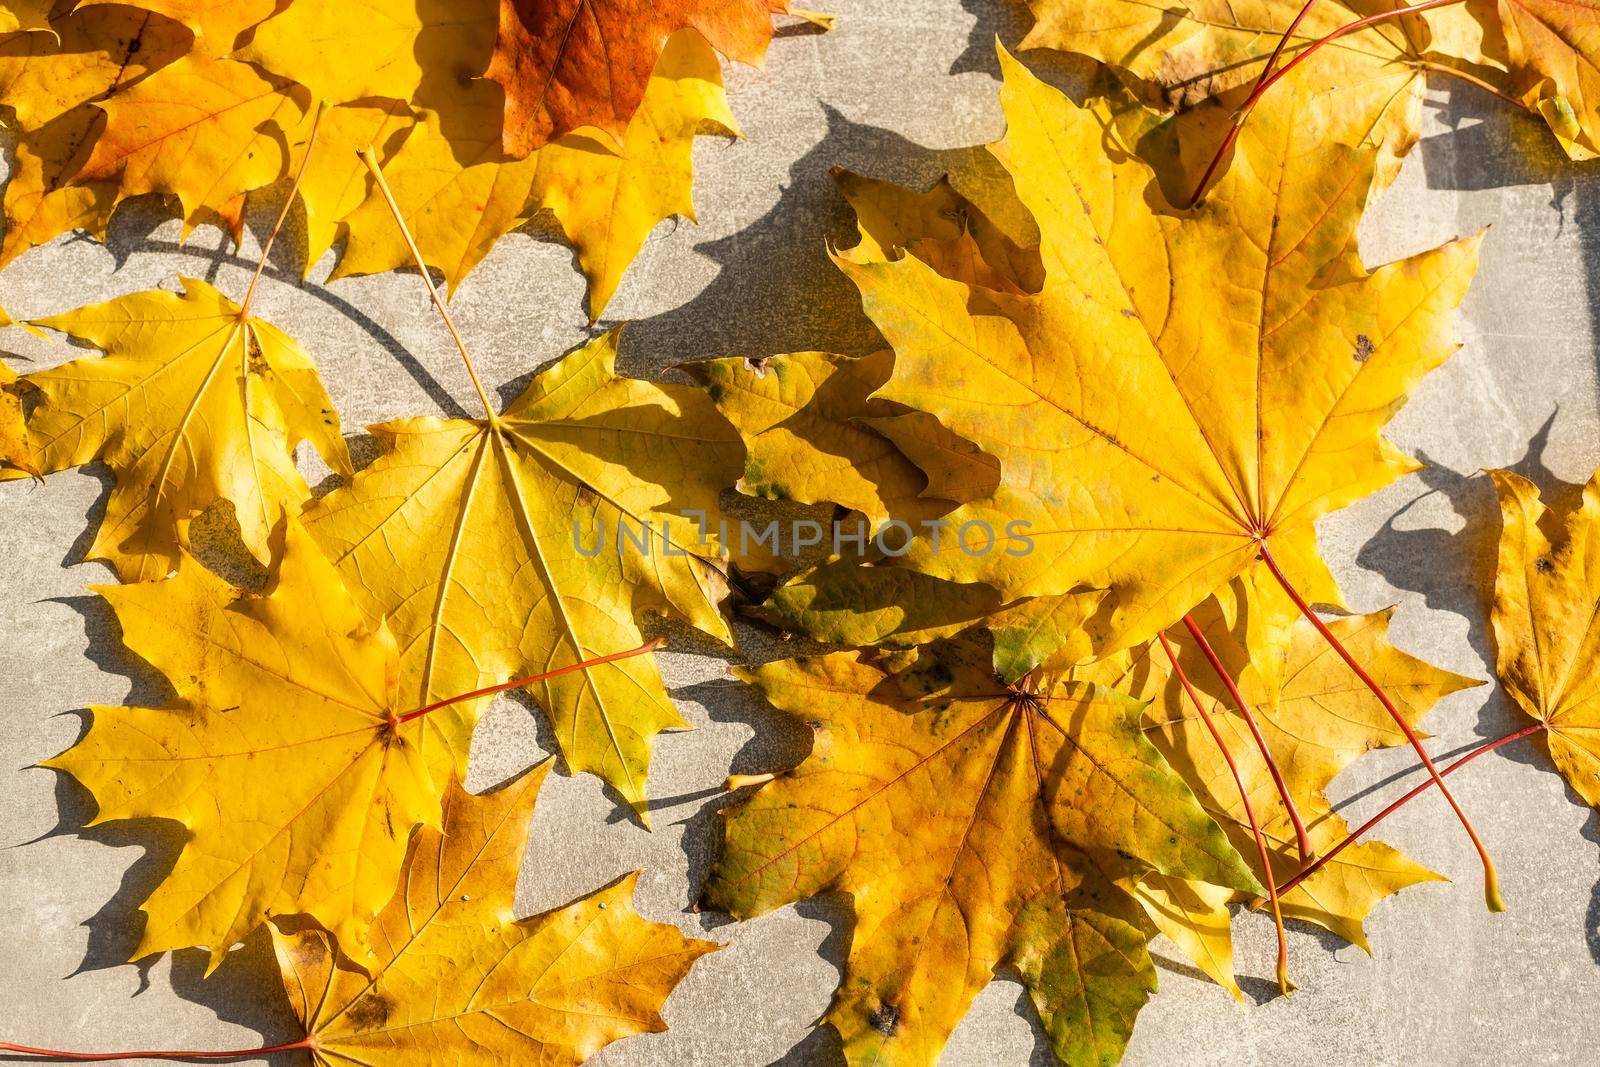 Autumn maple leaves on gray wooden background